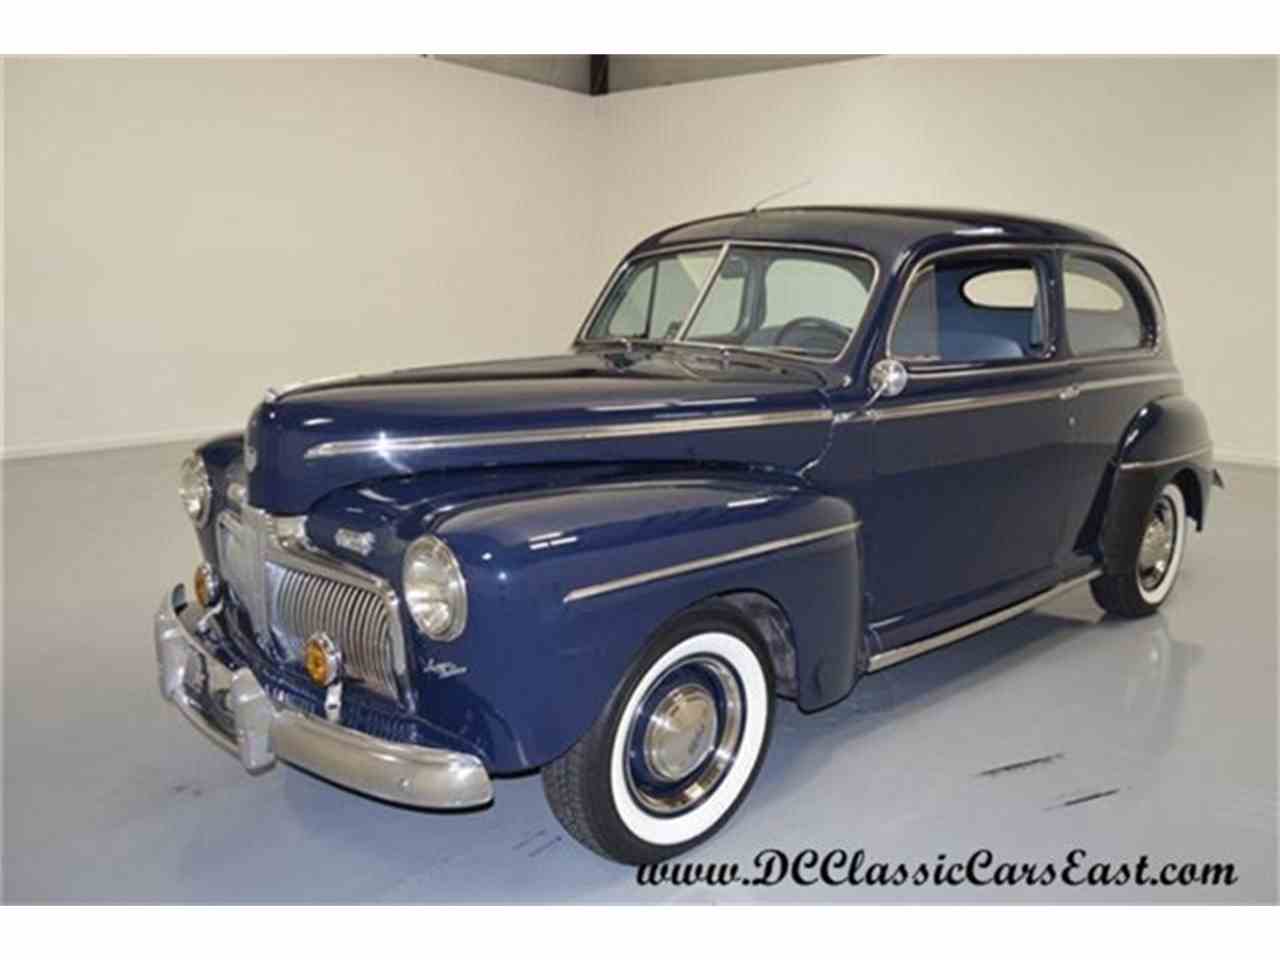 1942 Ford Super Deluxe For Sale Classiccars Cc 836099 for Classic Cars Mooresville Nc